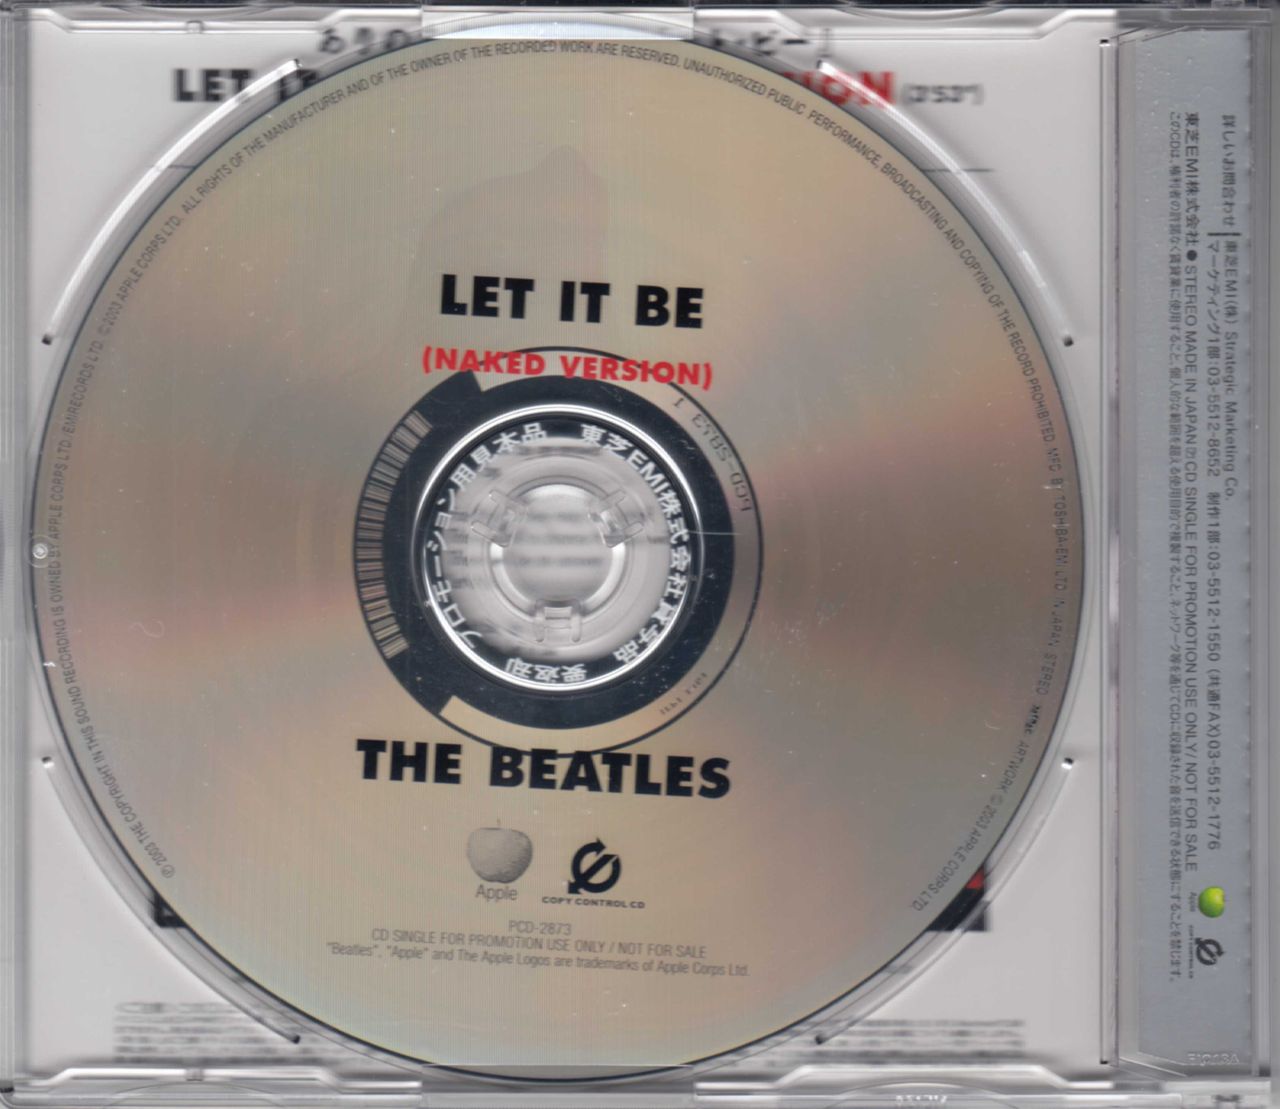 The Beatles Let It Be - Naked Version Japanese Promo CD